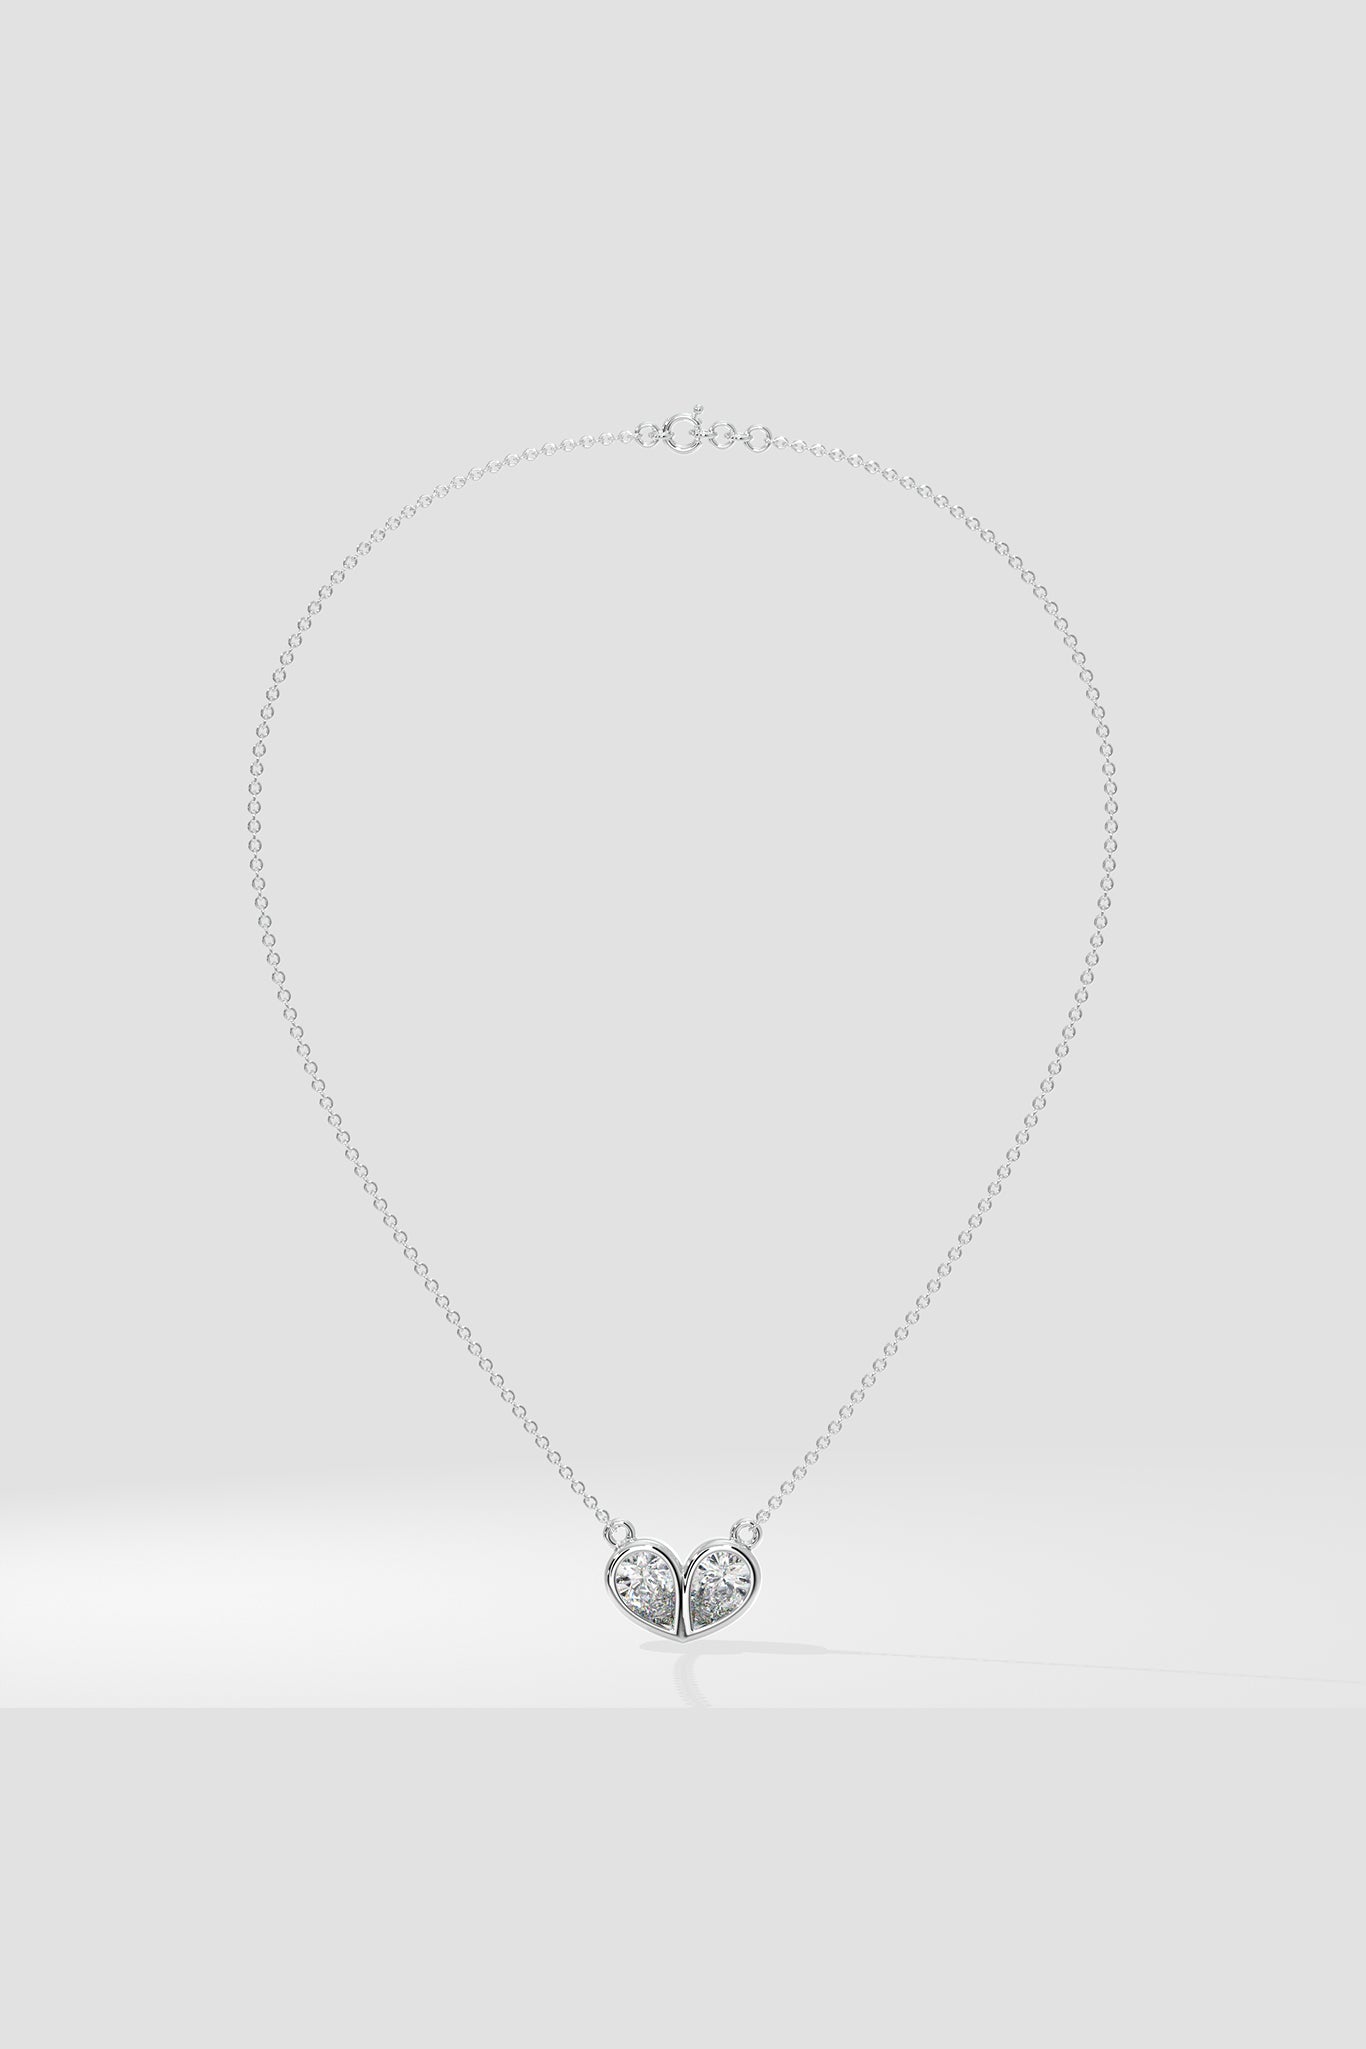 The Duo Heart Necklace - House Of Quadri